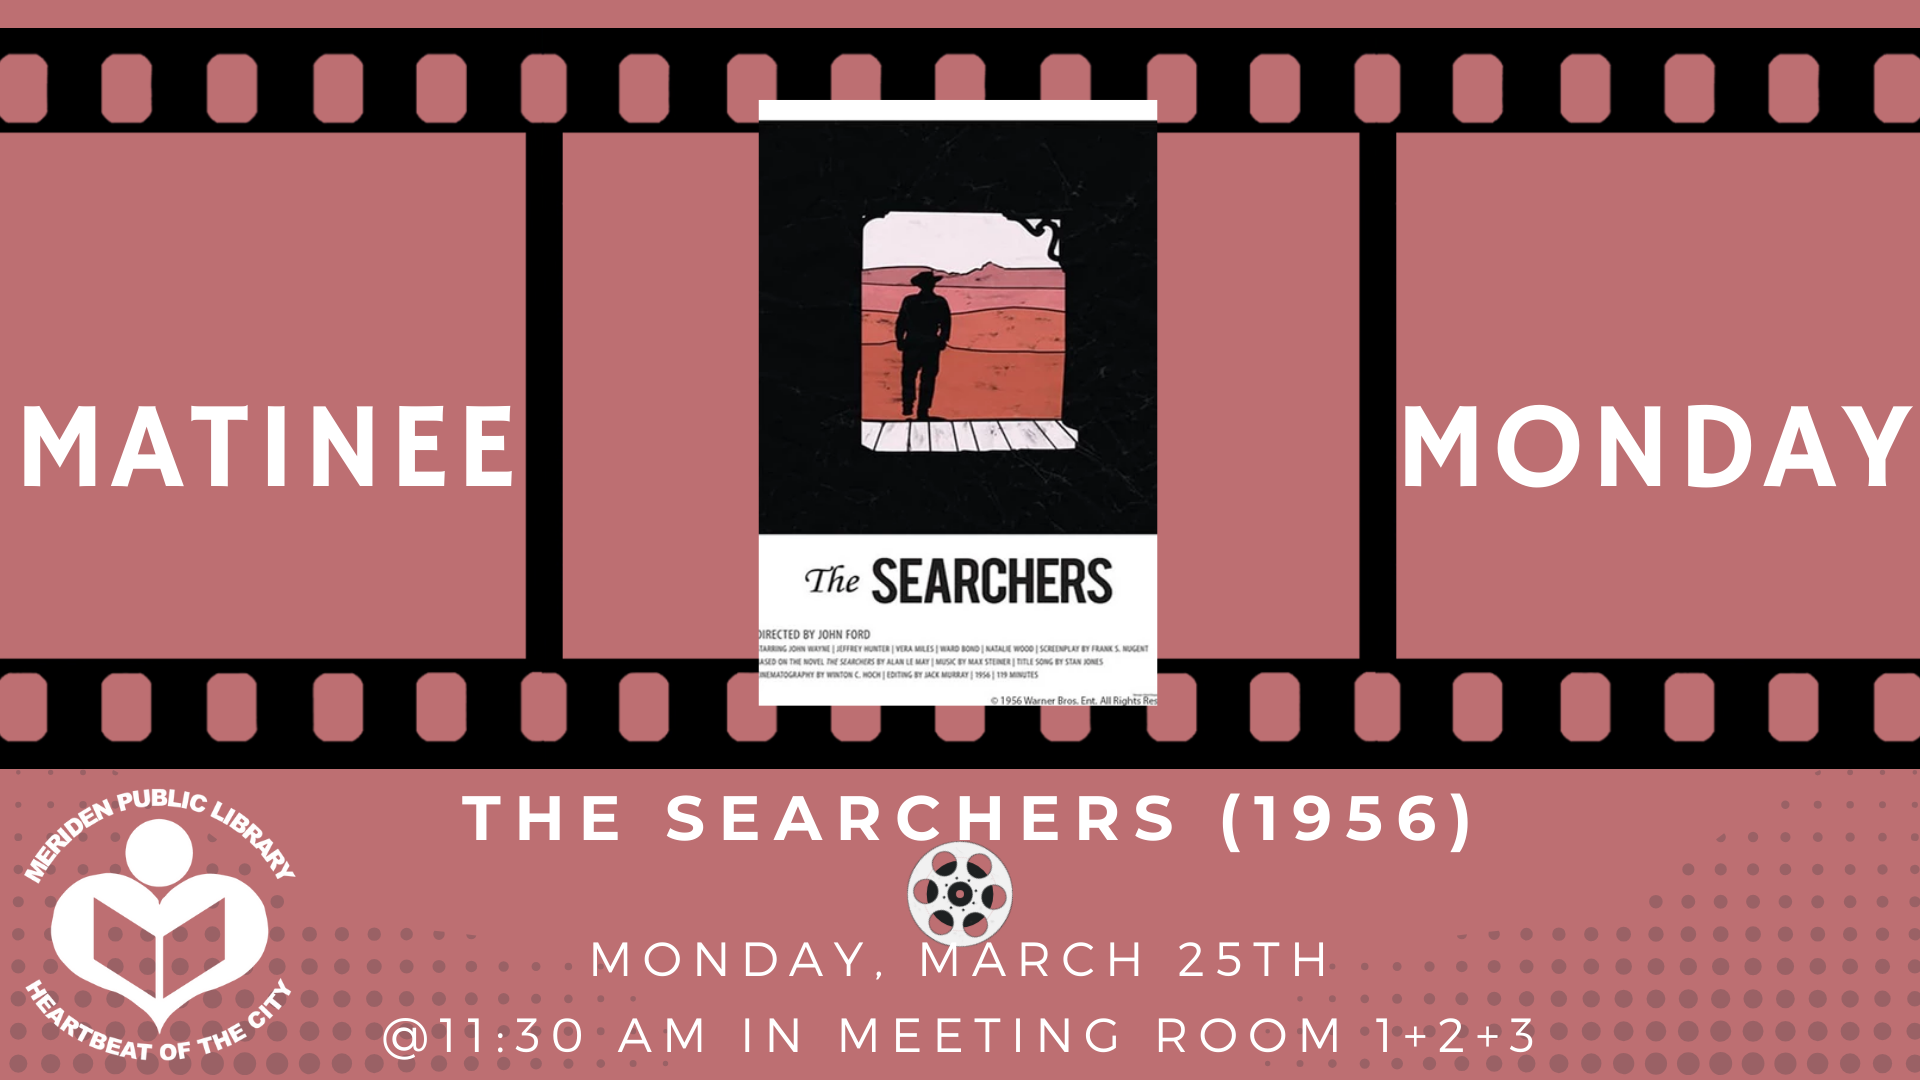 The Searcher's film poster in between a roll of film in center screen